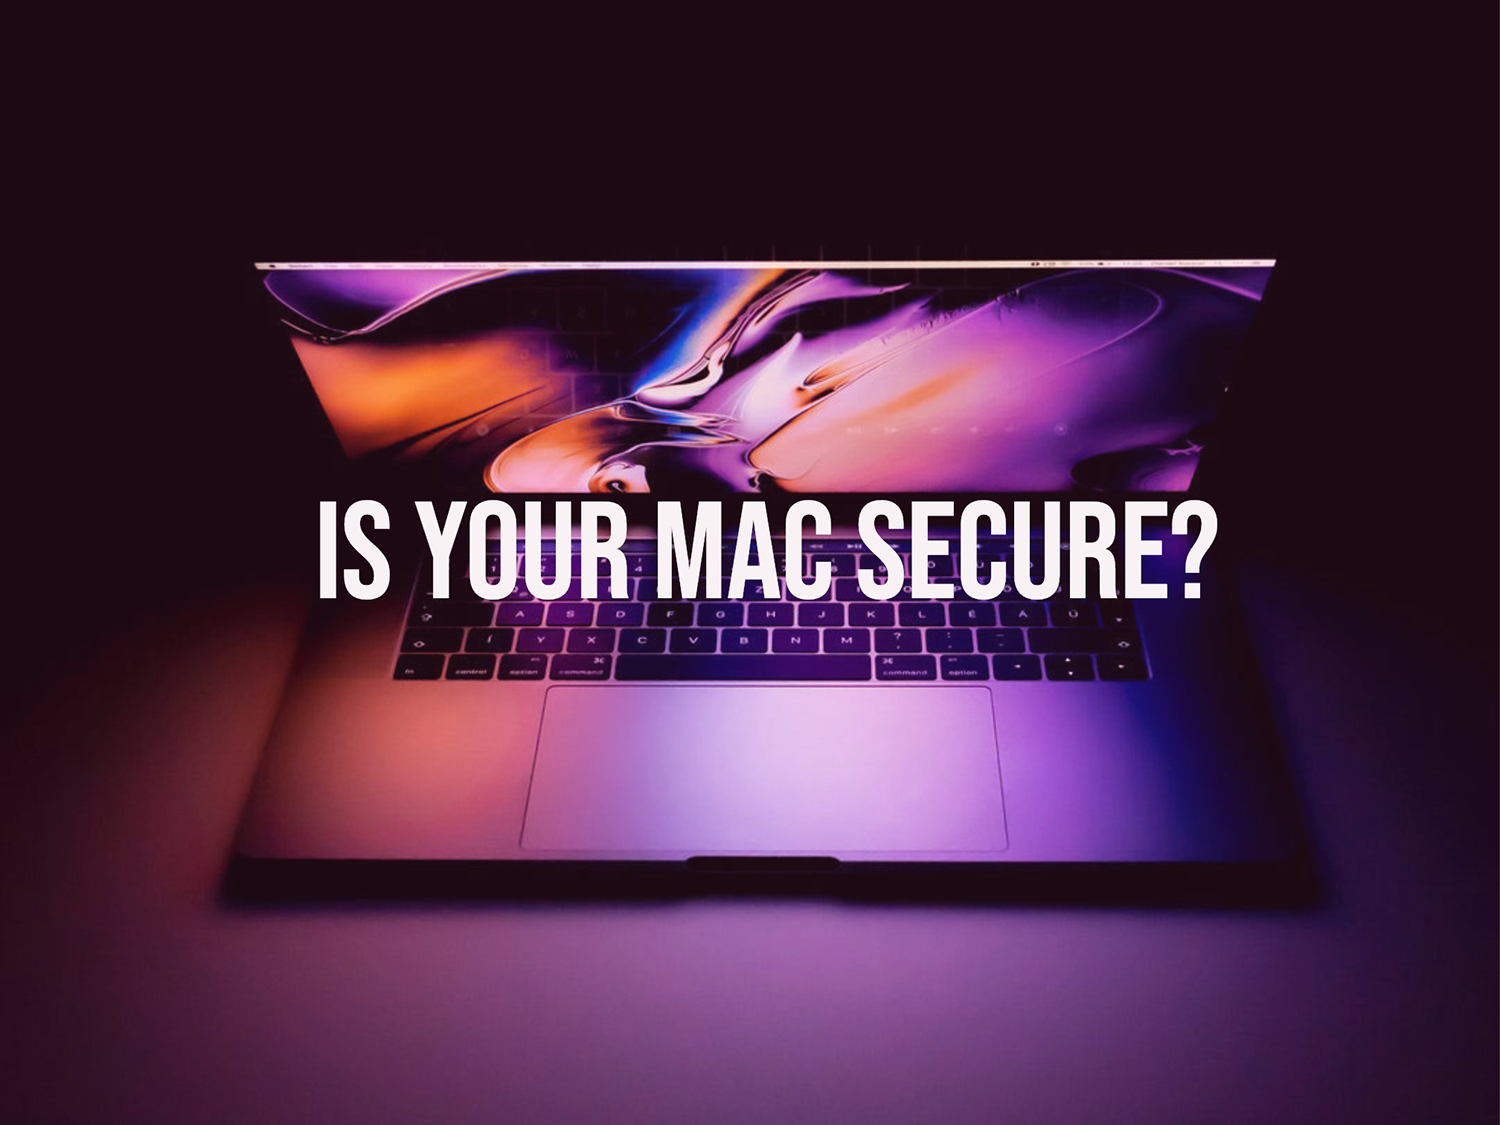 is your mac secure? image